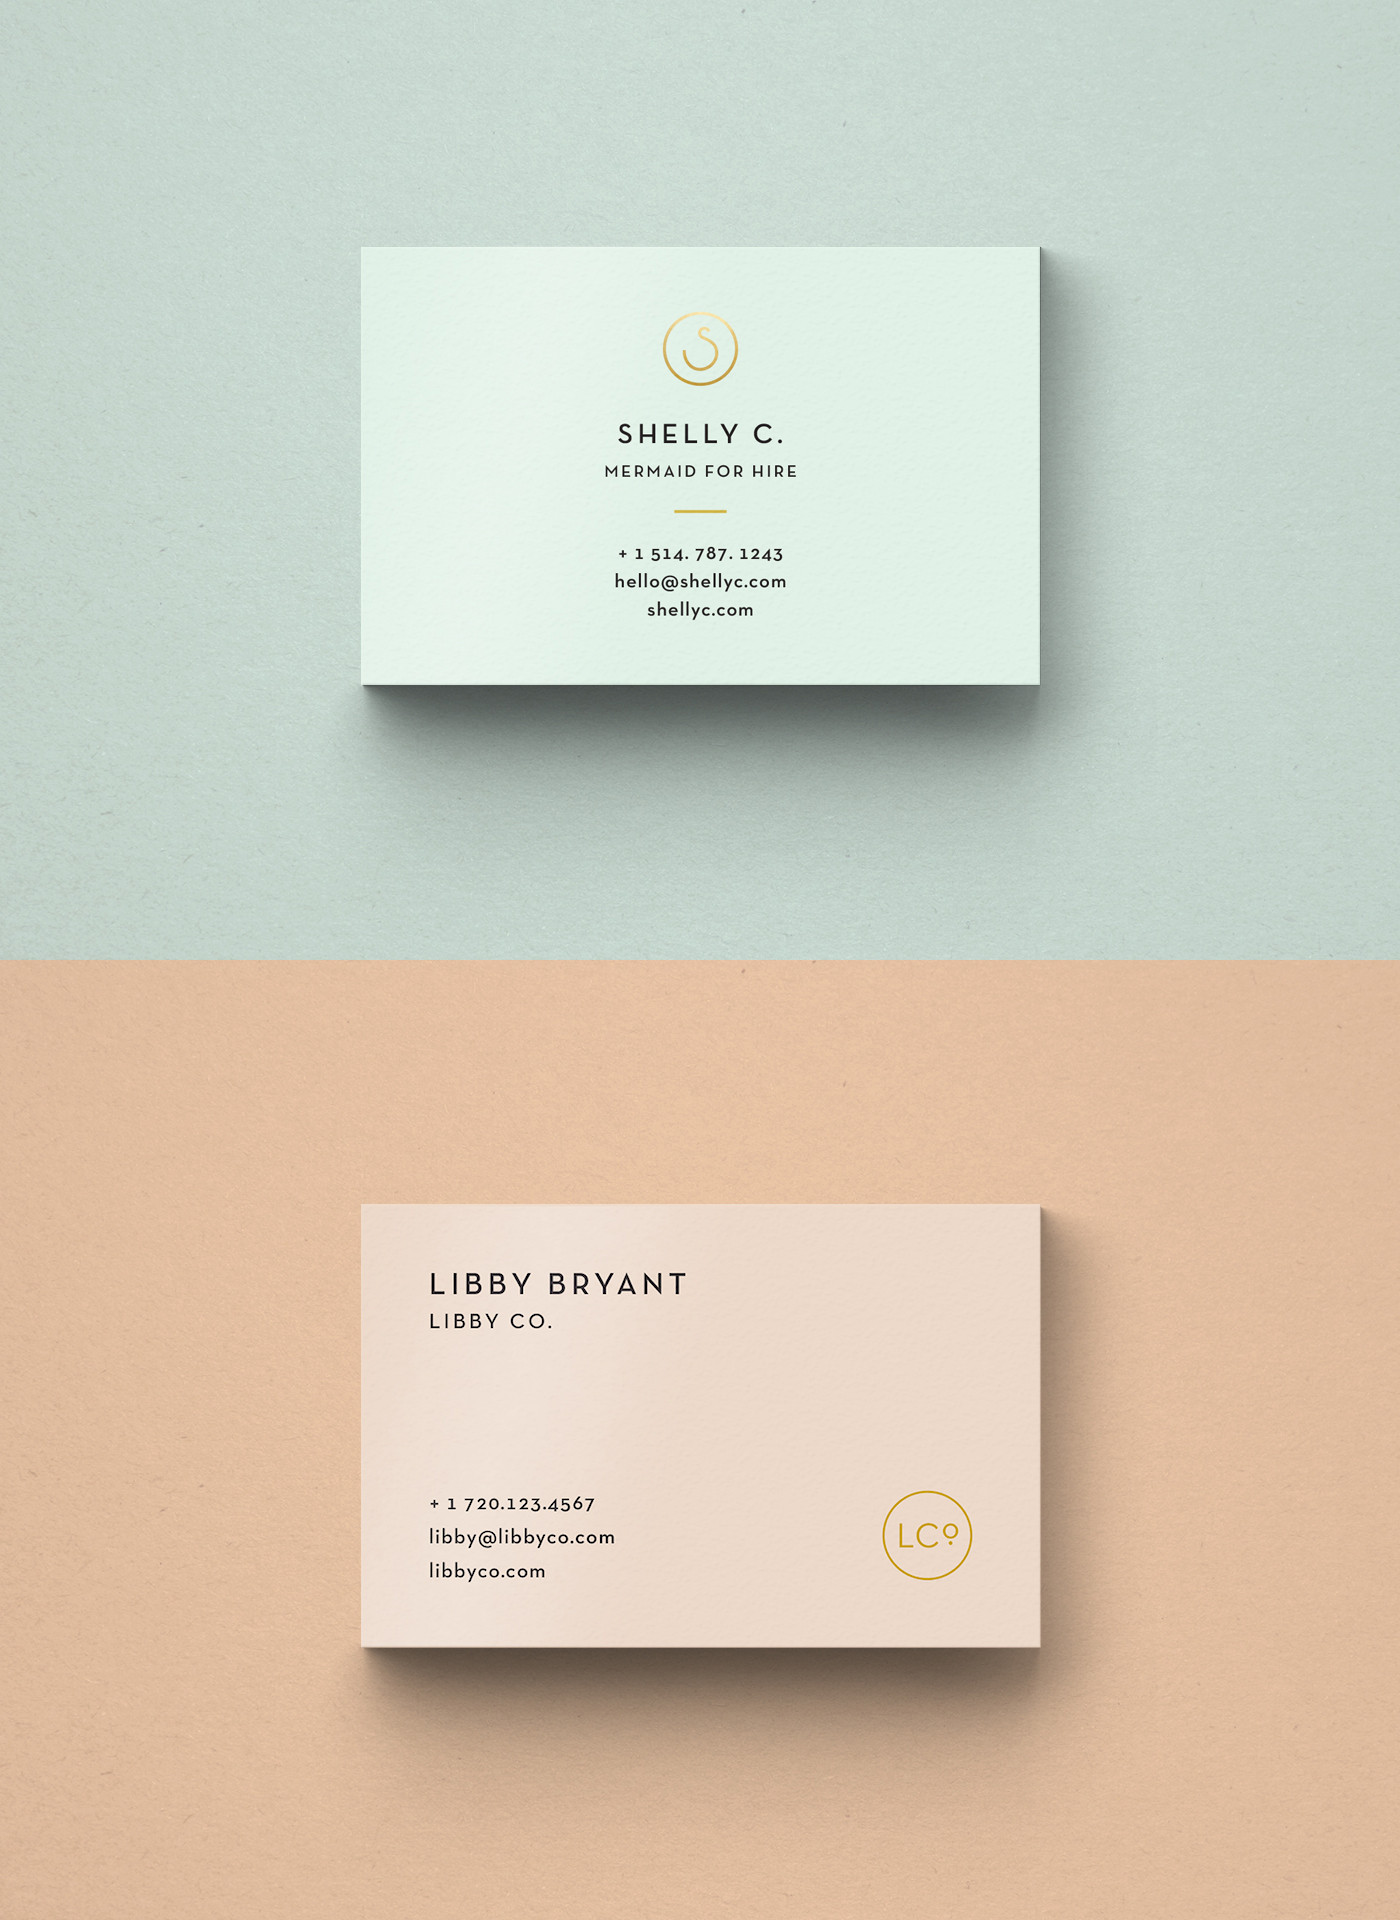 006 Libbyco Free Business Card Templates Template Download Of Business Card Letterhead Envelope Template